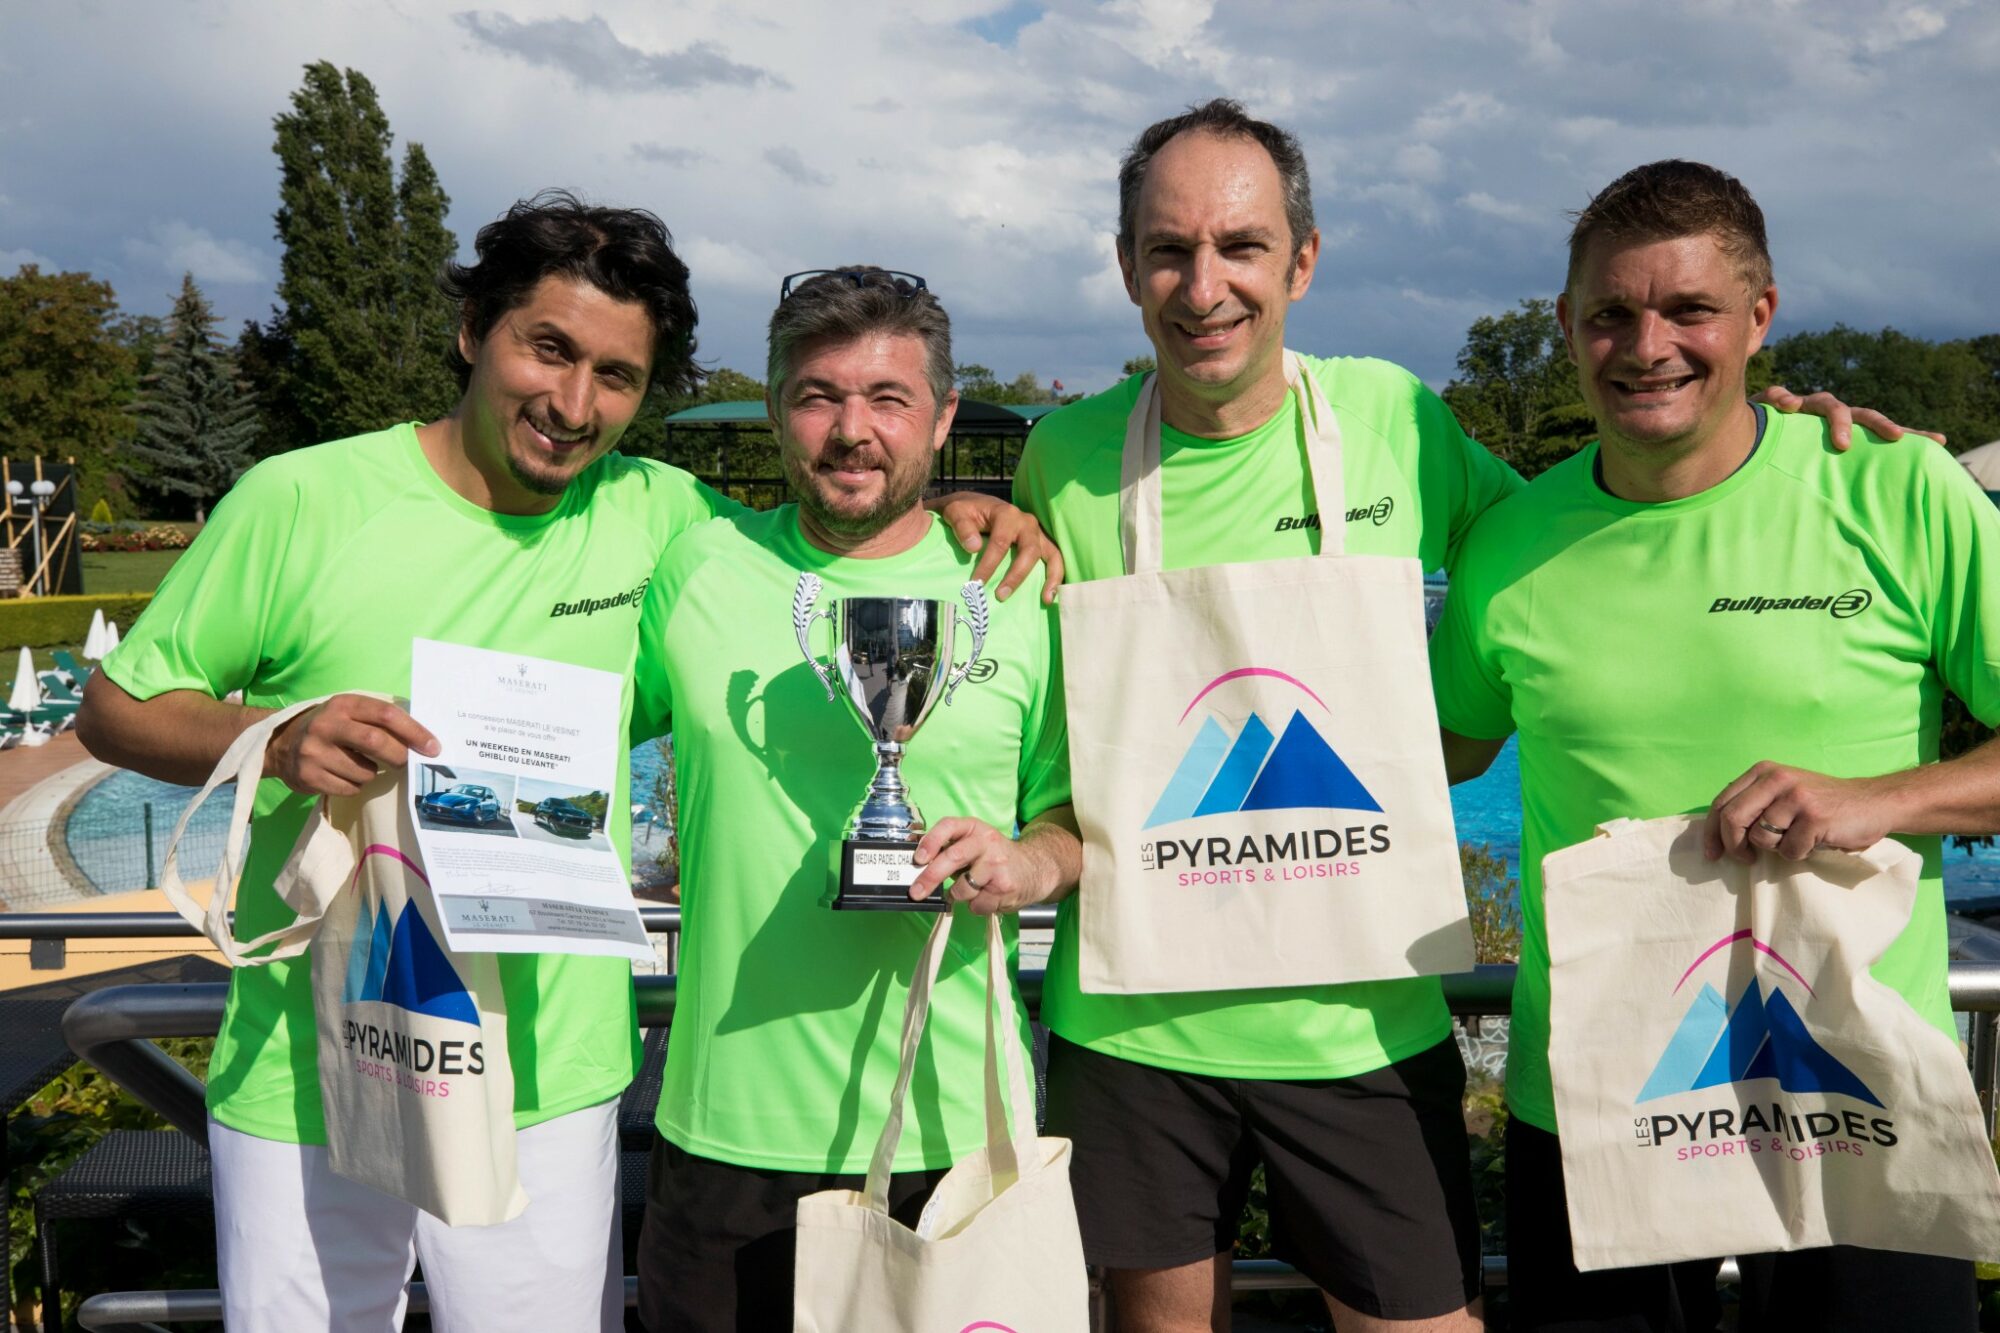 The FFT wins the Media Padel 2019